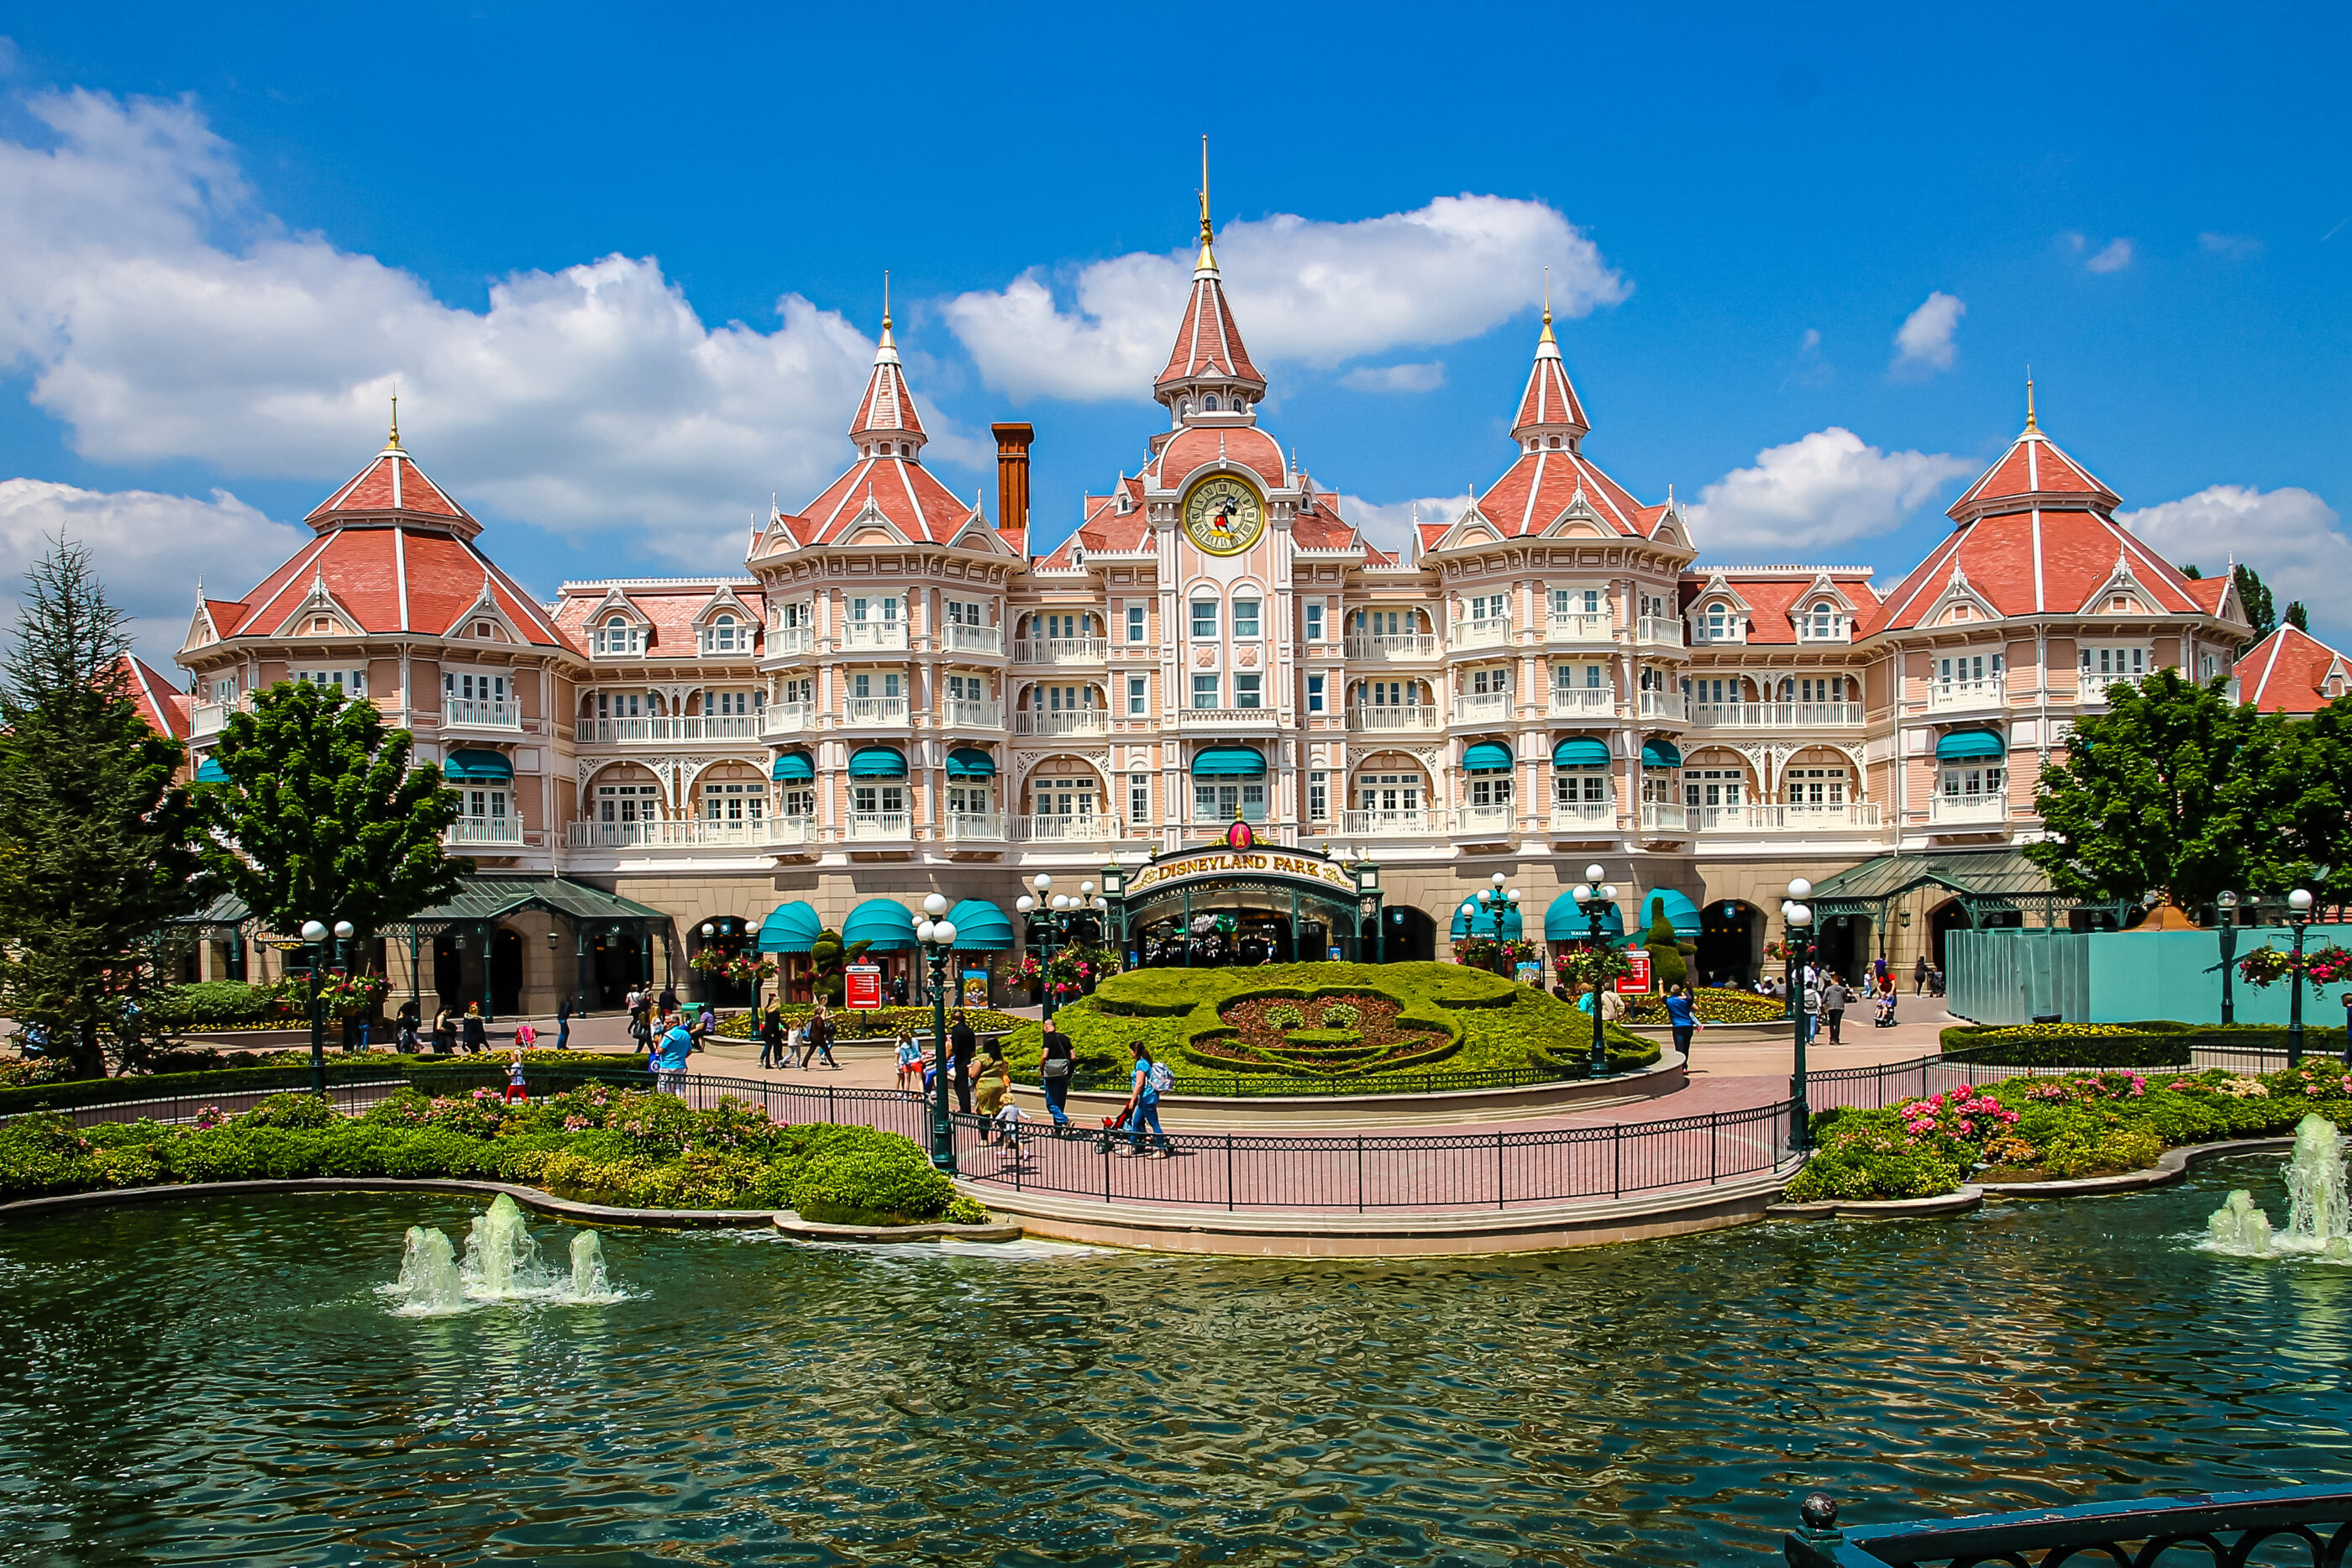 disneyland paris is one of the best theme parks in europe